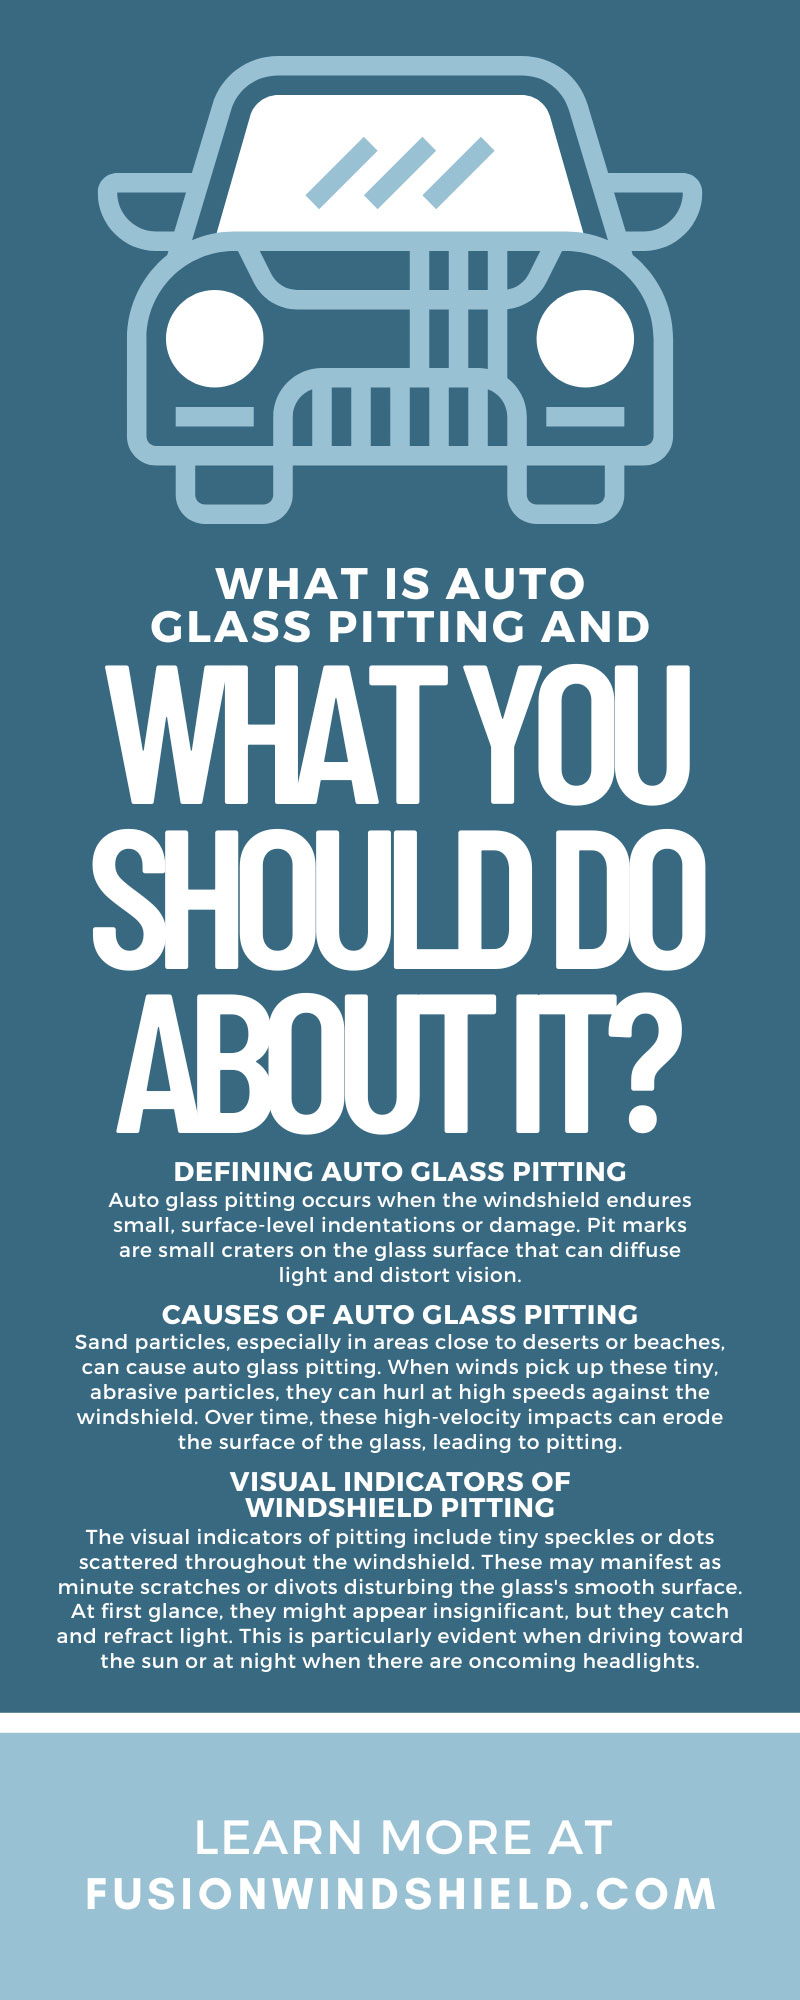 What Is Auto Glass Pitting and What You Should Do About It?